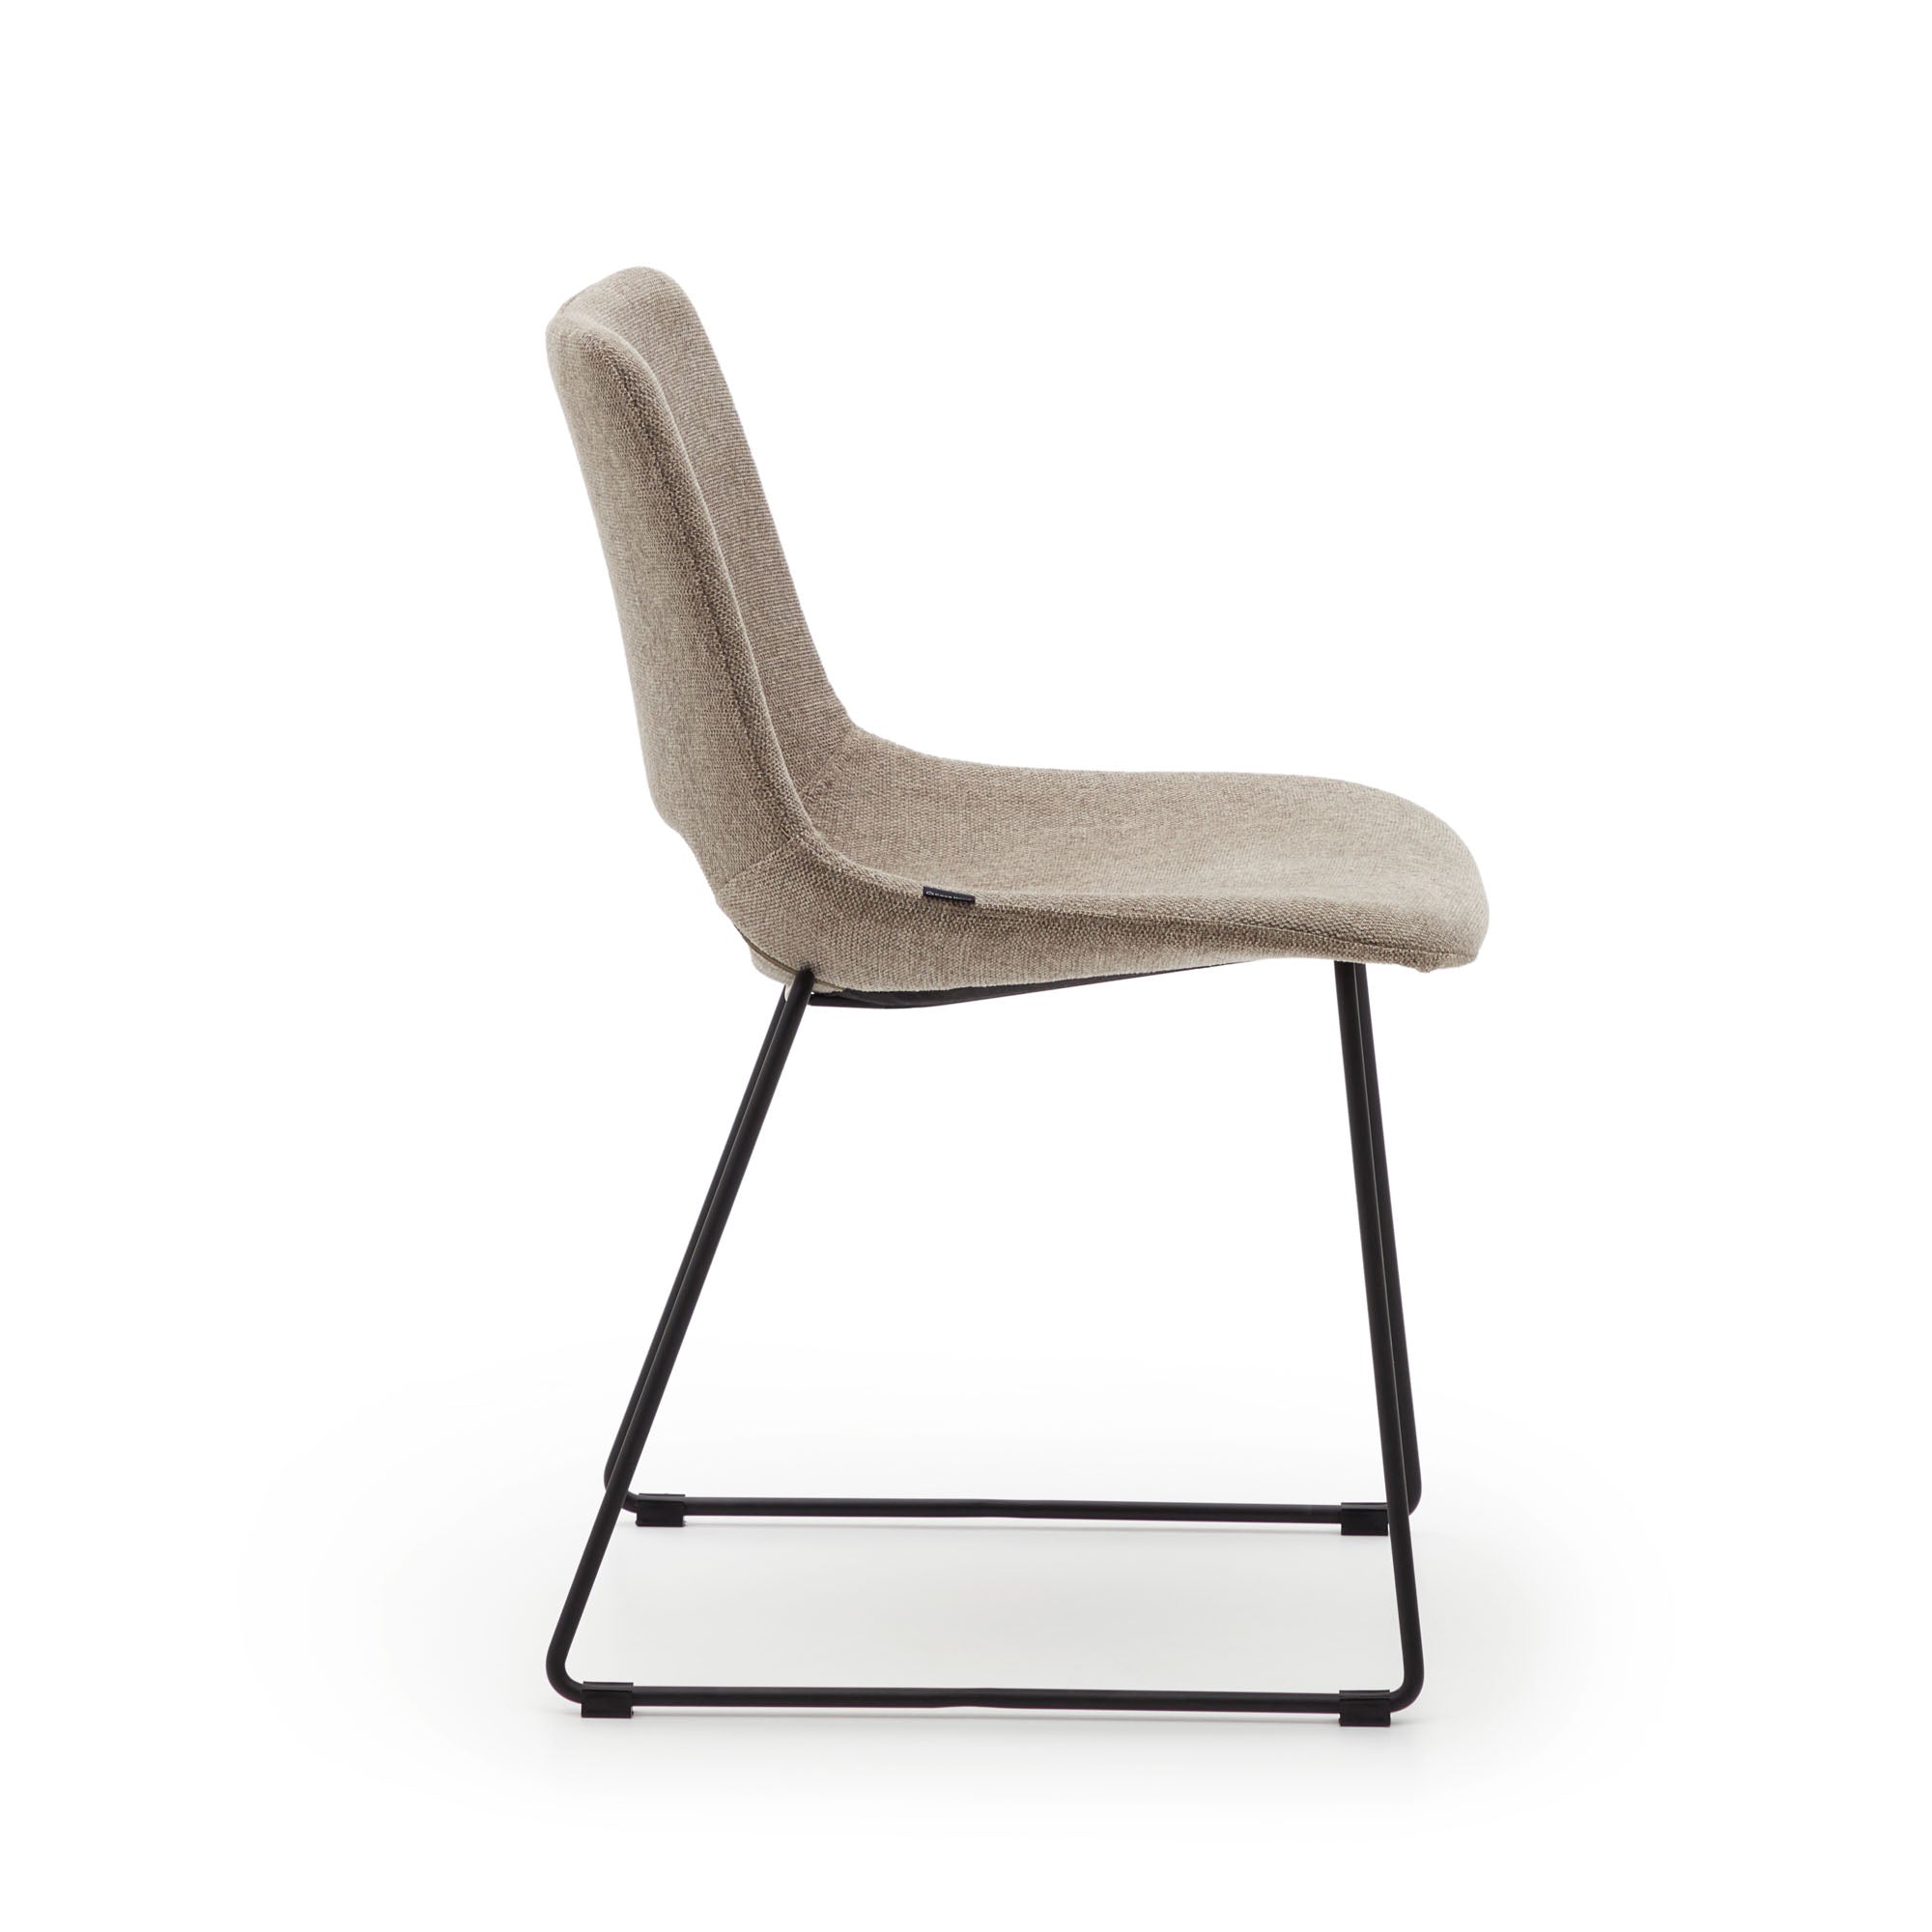 Zahara chair in brown with steel legs in a black finish